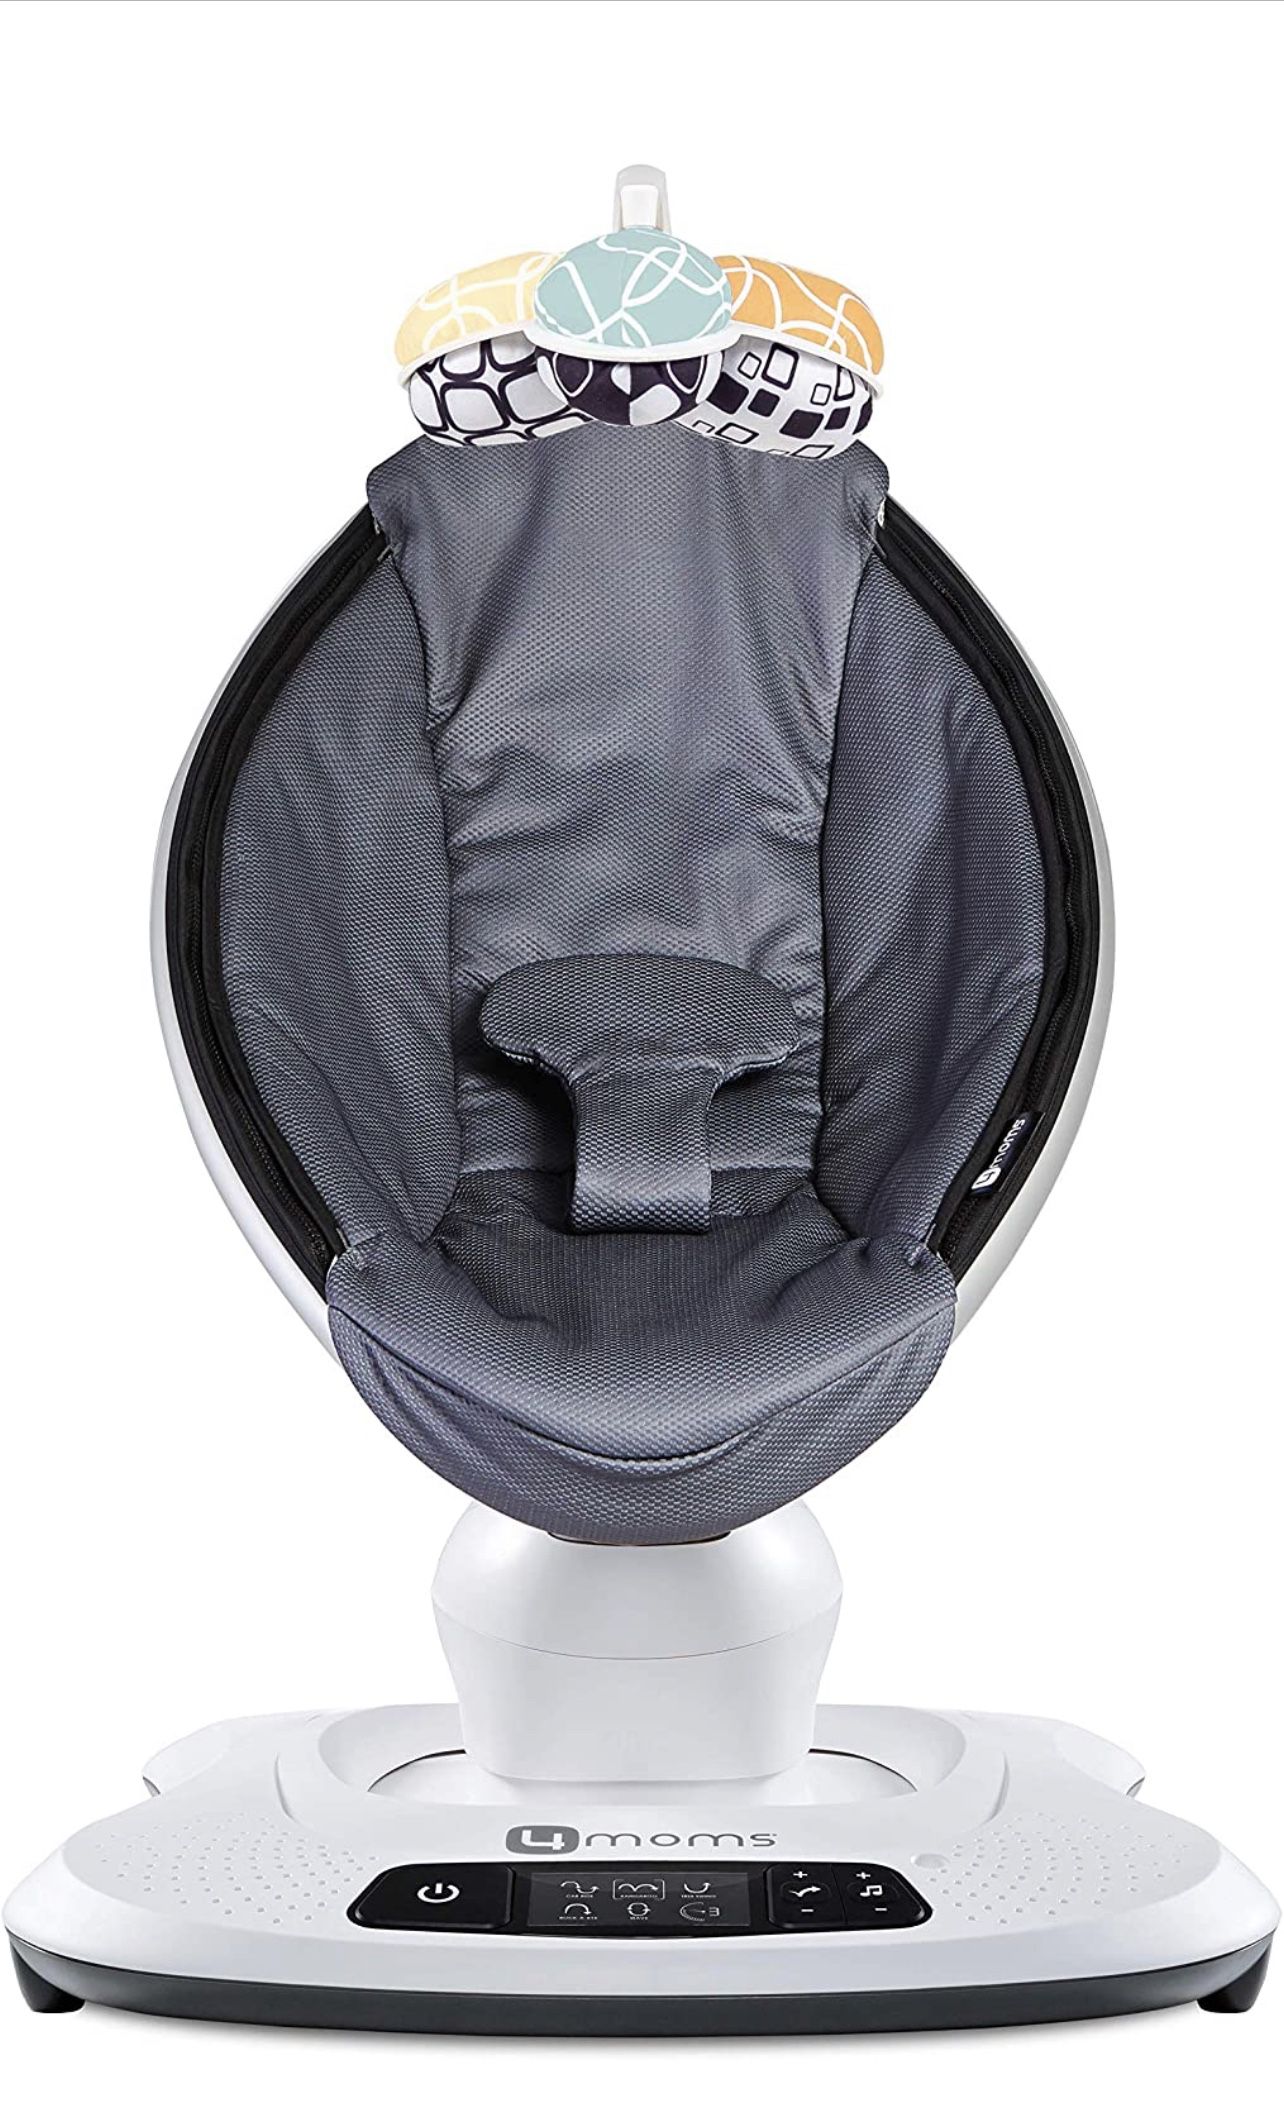  4moms mamaRoo 4 Baby Swing, Bluetooth Baby Rocker with 5 Unique Motions, Cool Mesh Fabric, Dark Grey 